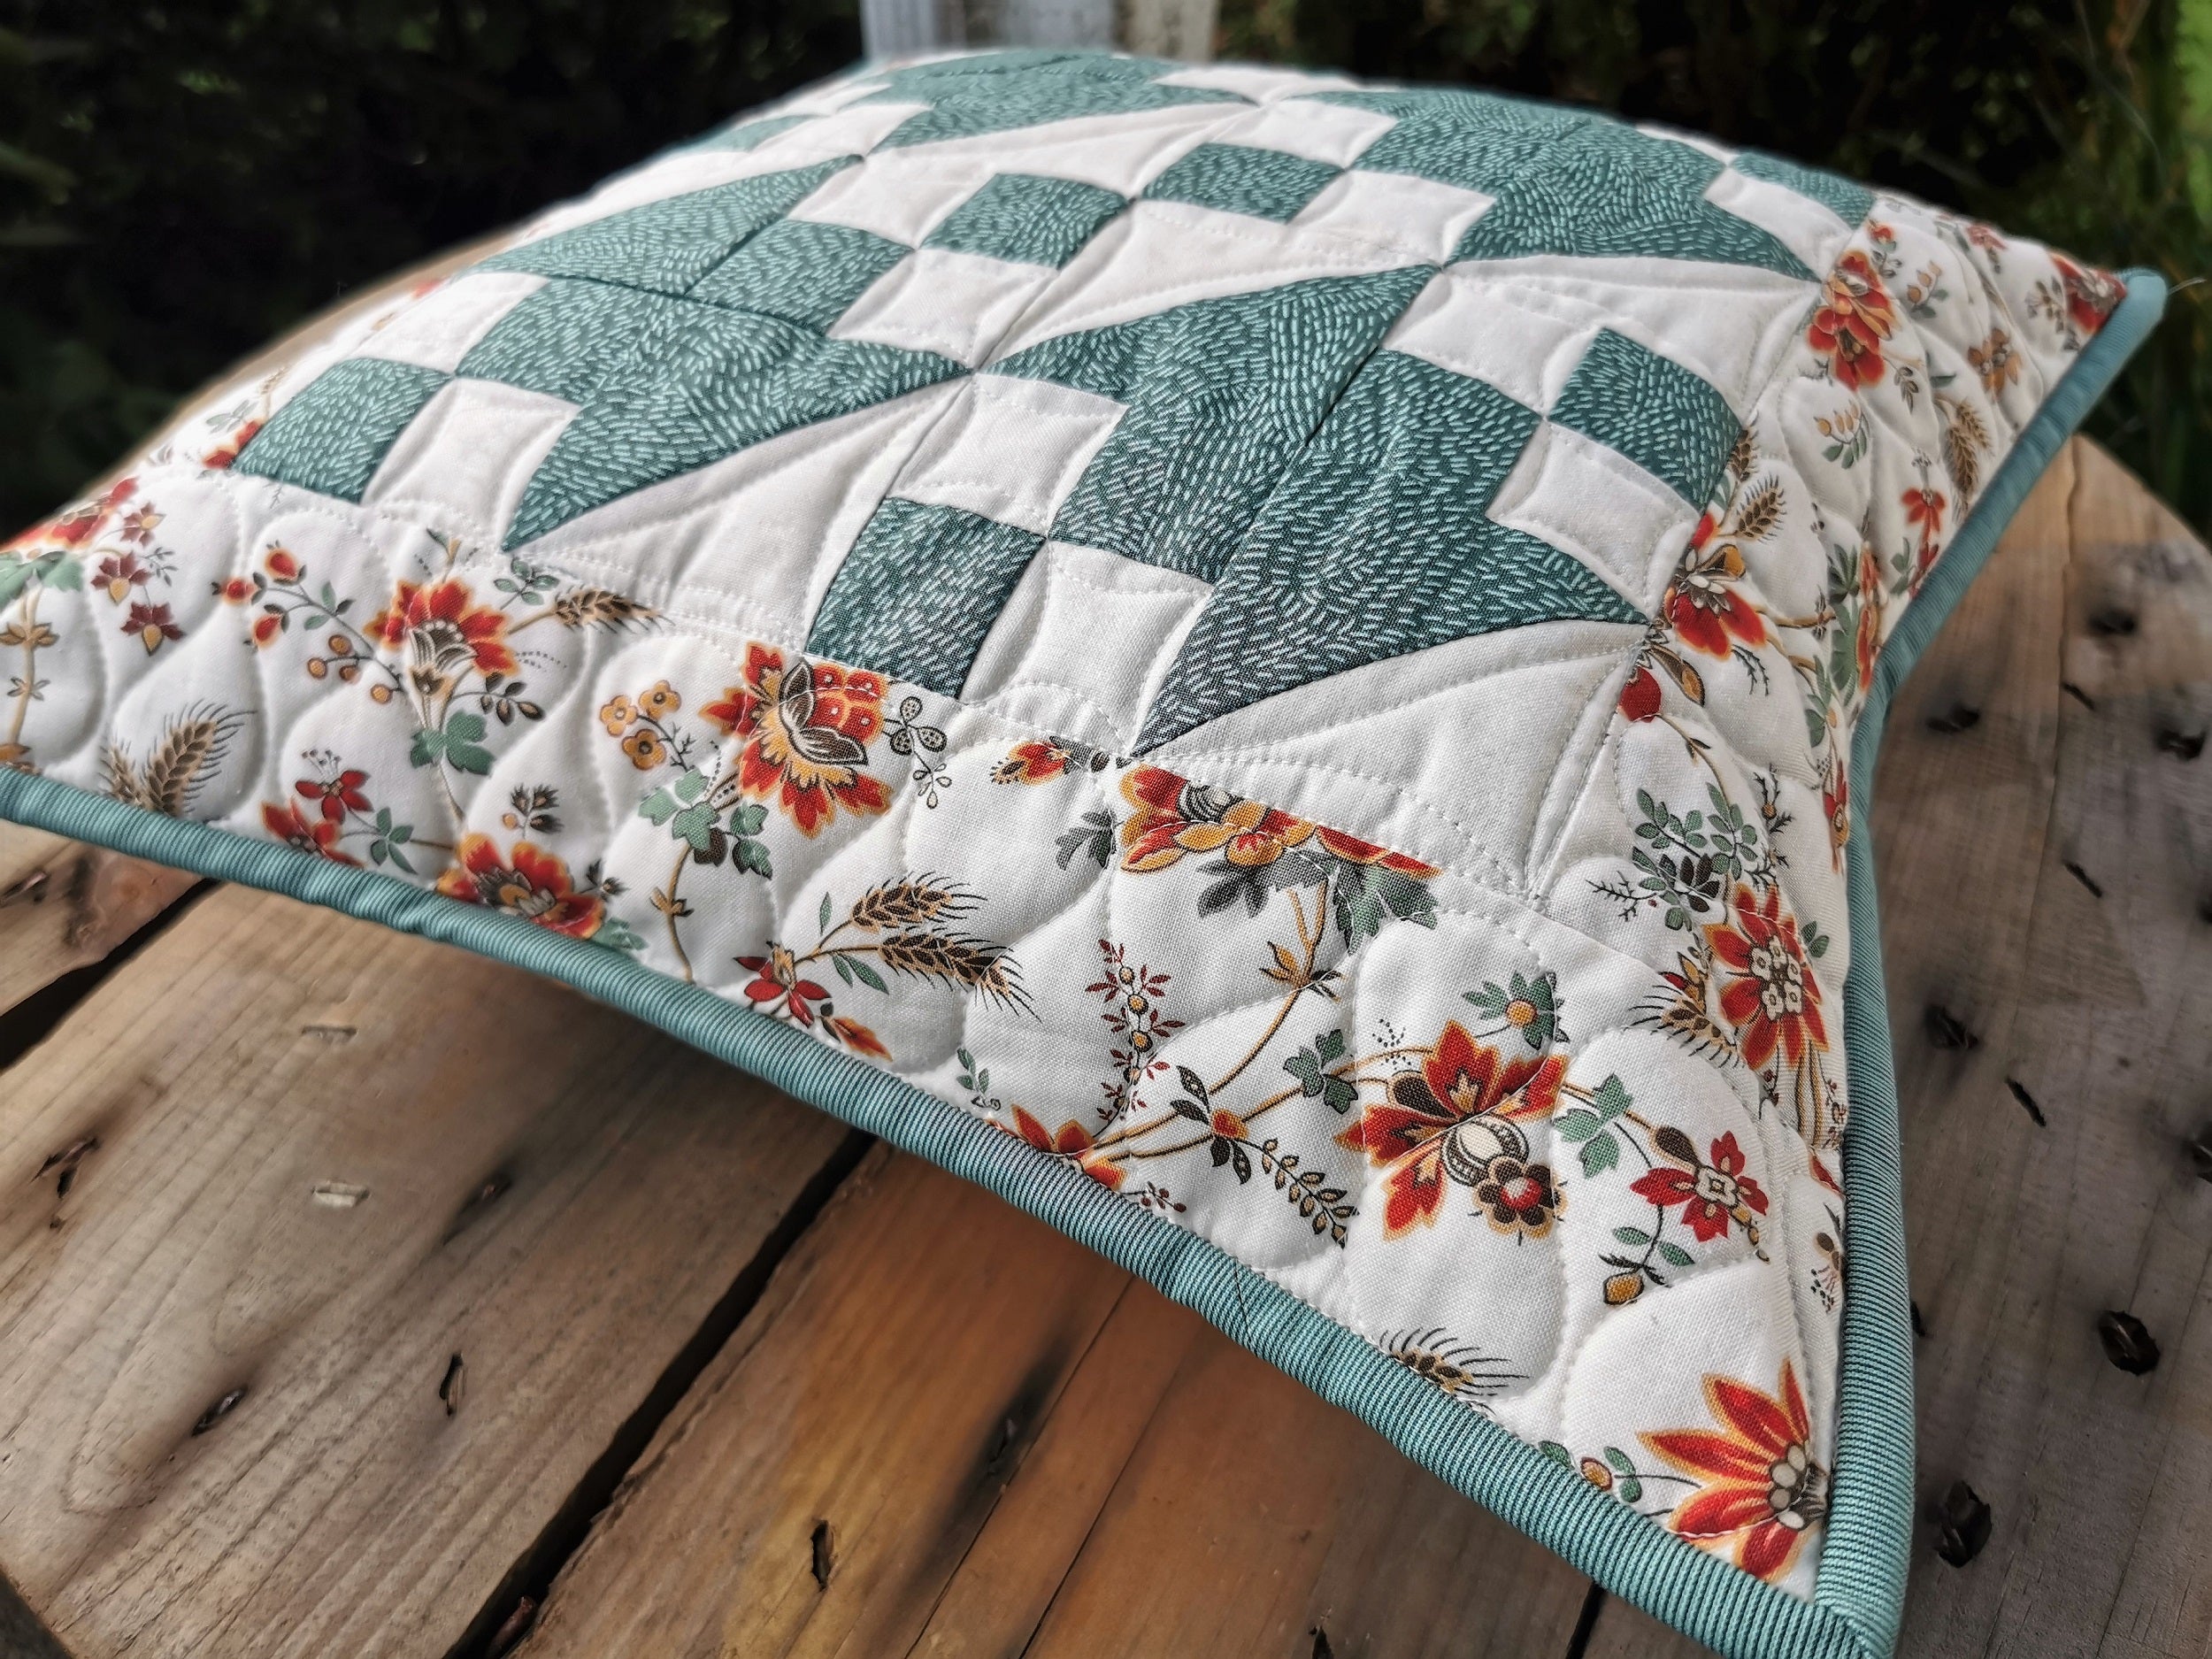 Teal Patchwork Pillow with Floral Border, 14 inch square Throw Cushion